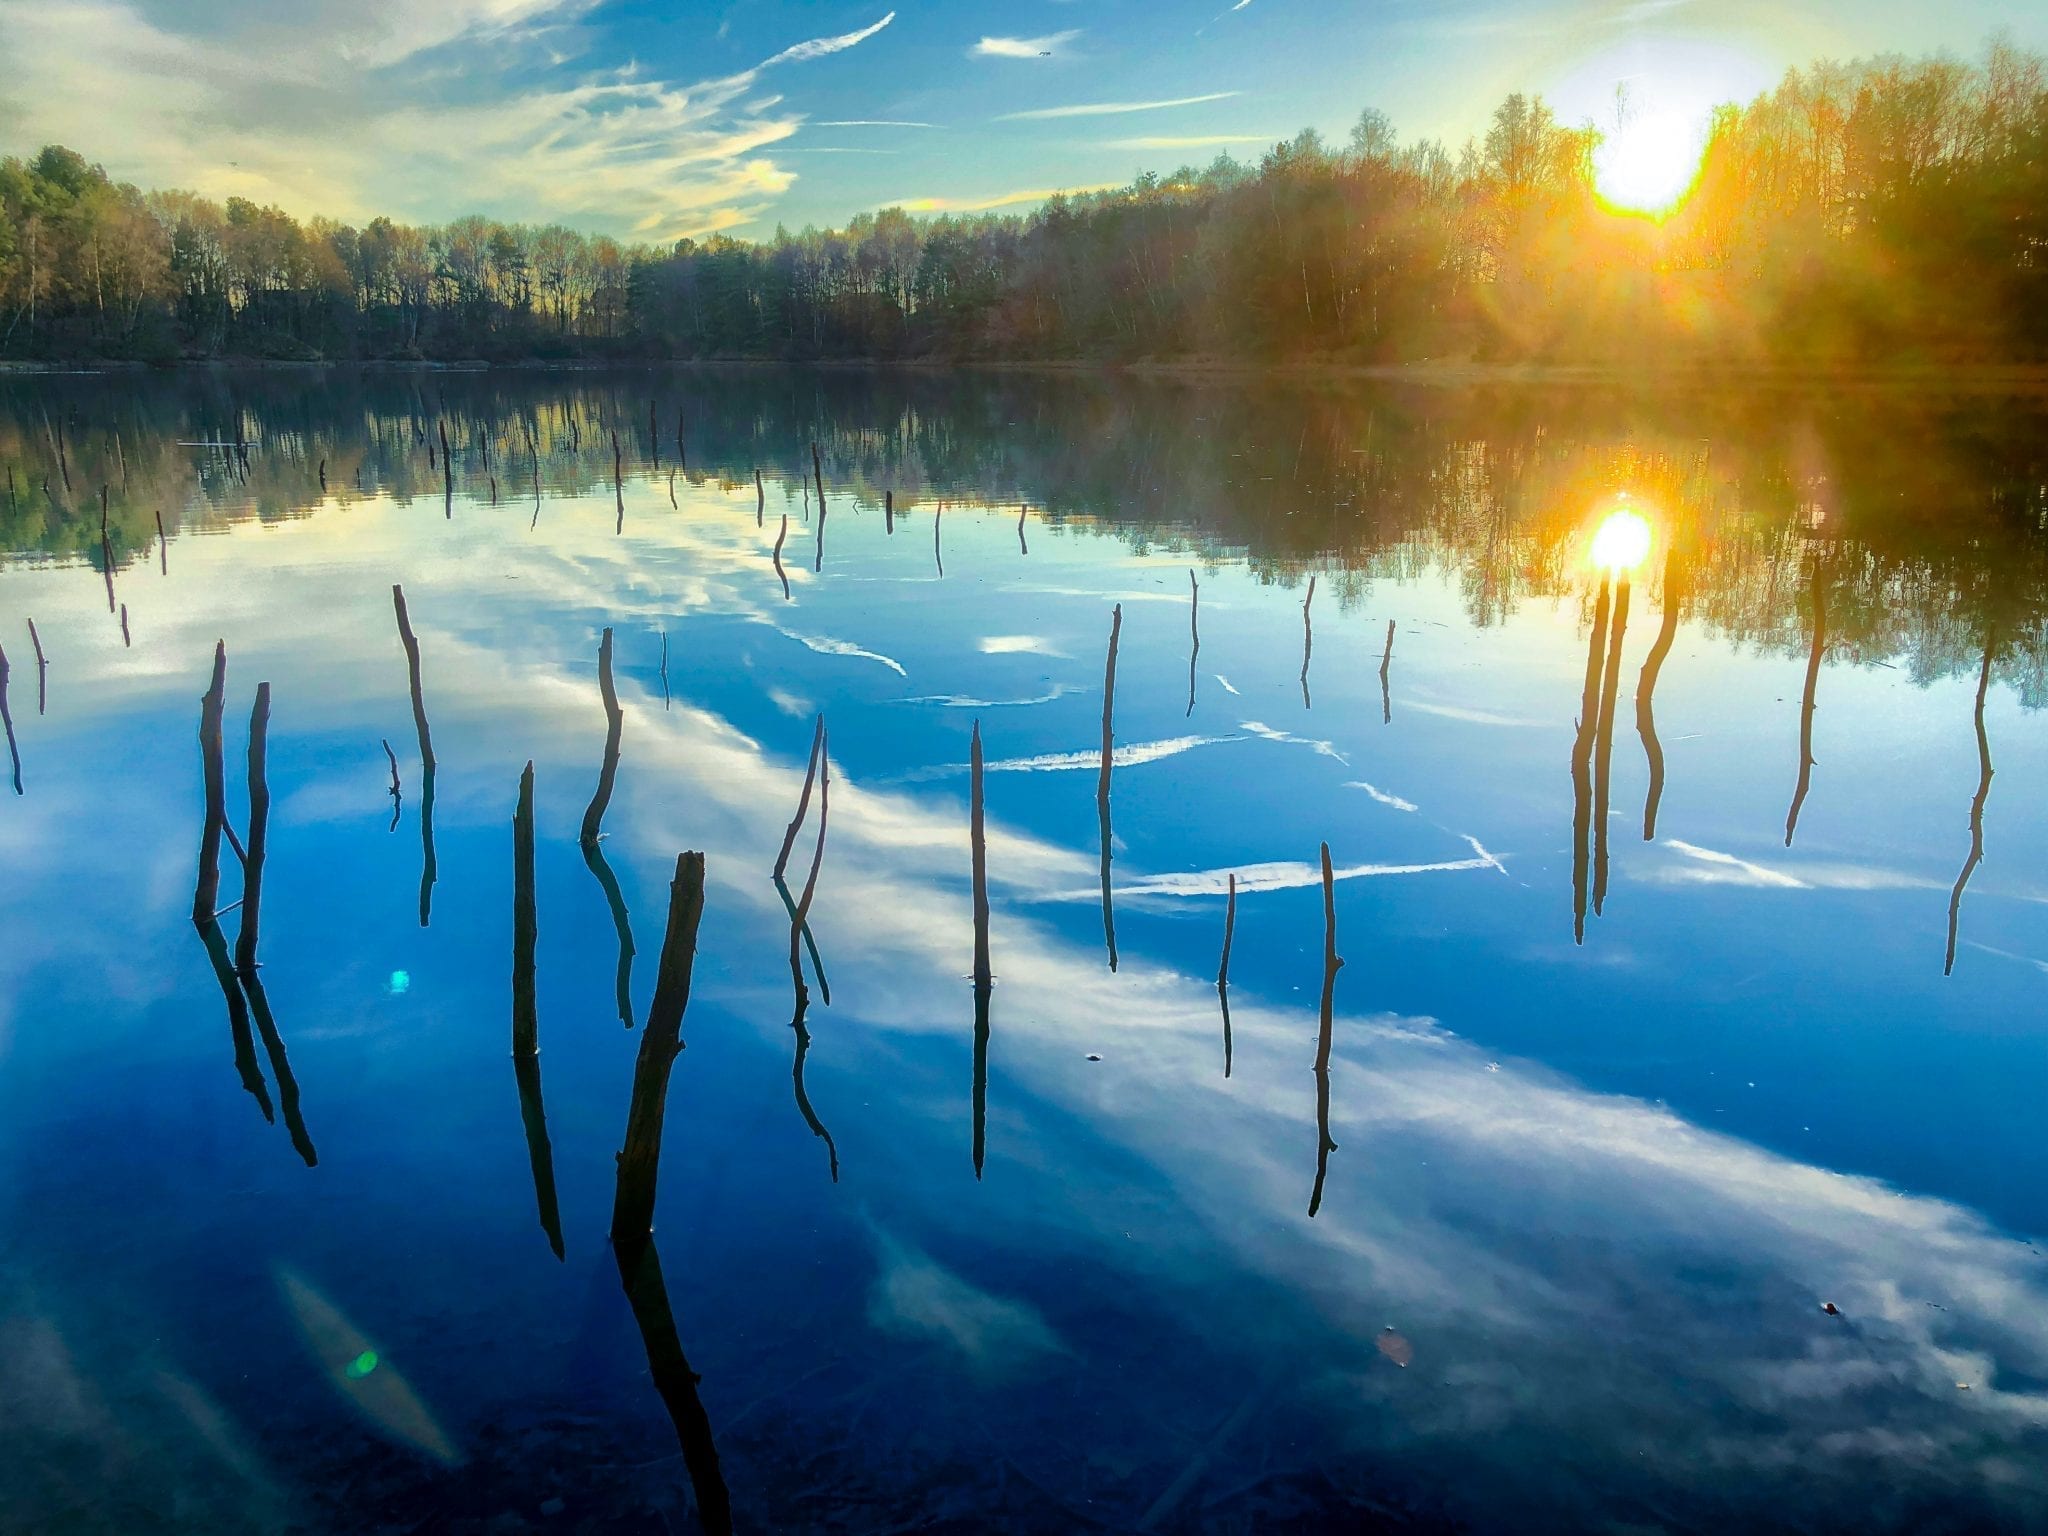 Sticks and branches sticking out of the water of a lake in a forest under a blue sky with a setting or rising sun, all reflected on the surface of the water